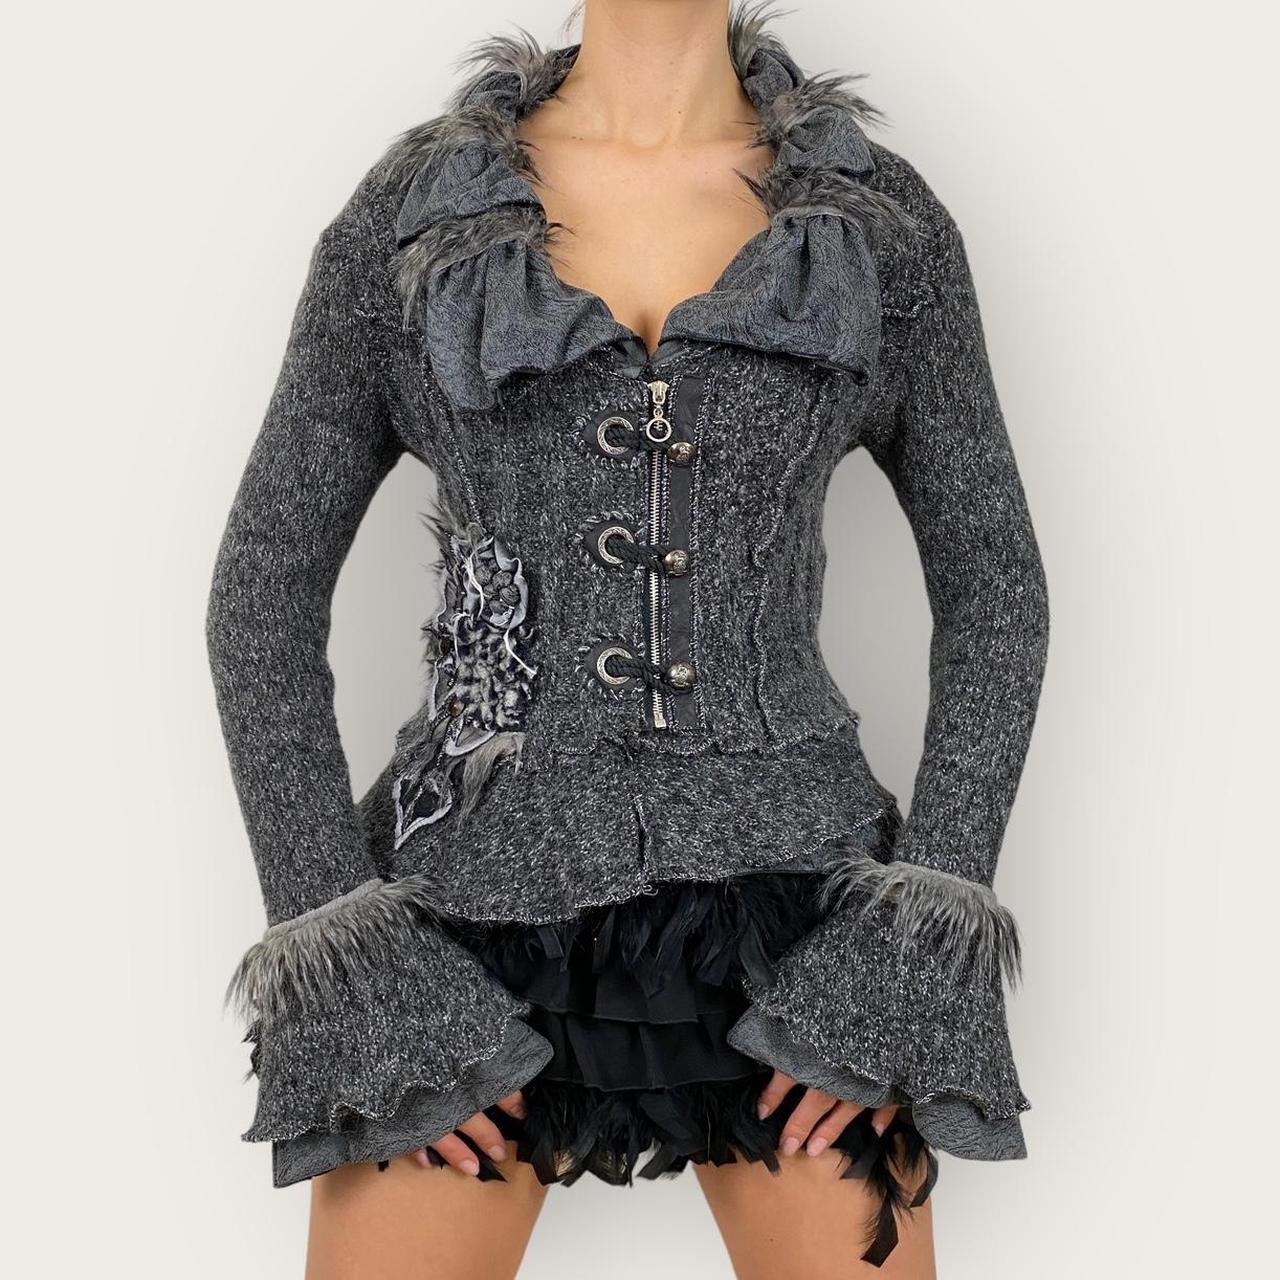 whimsigoth witchy knit wool crochet style avant... - Depop